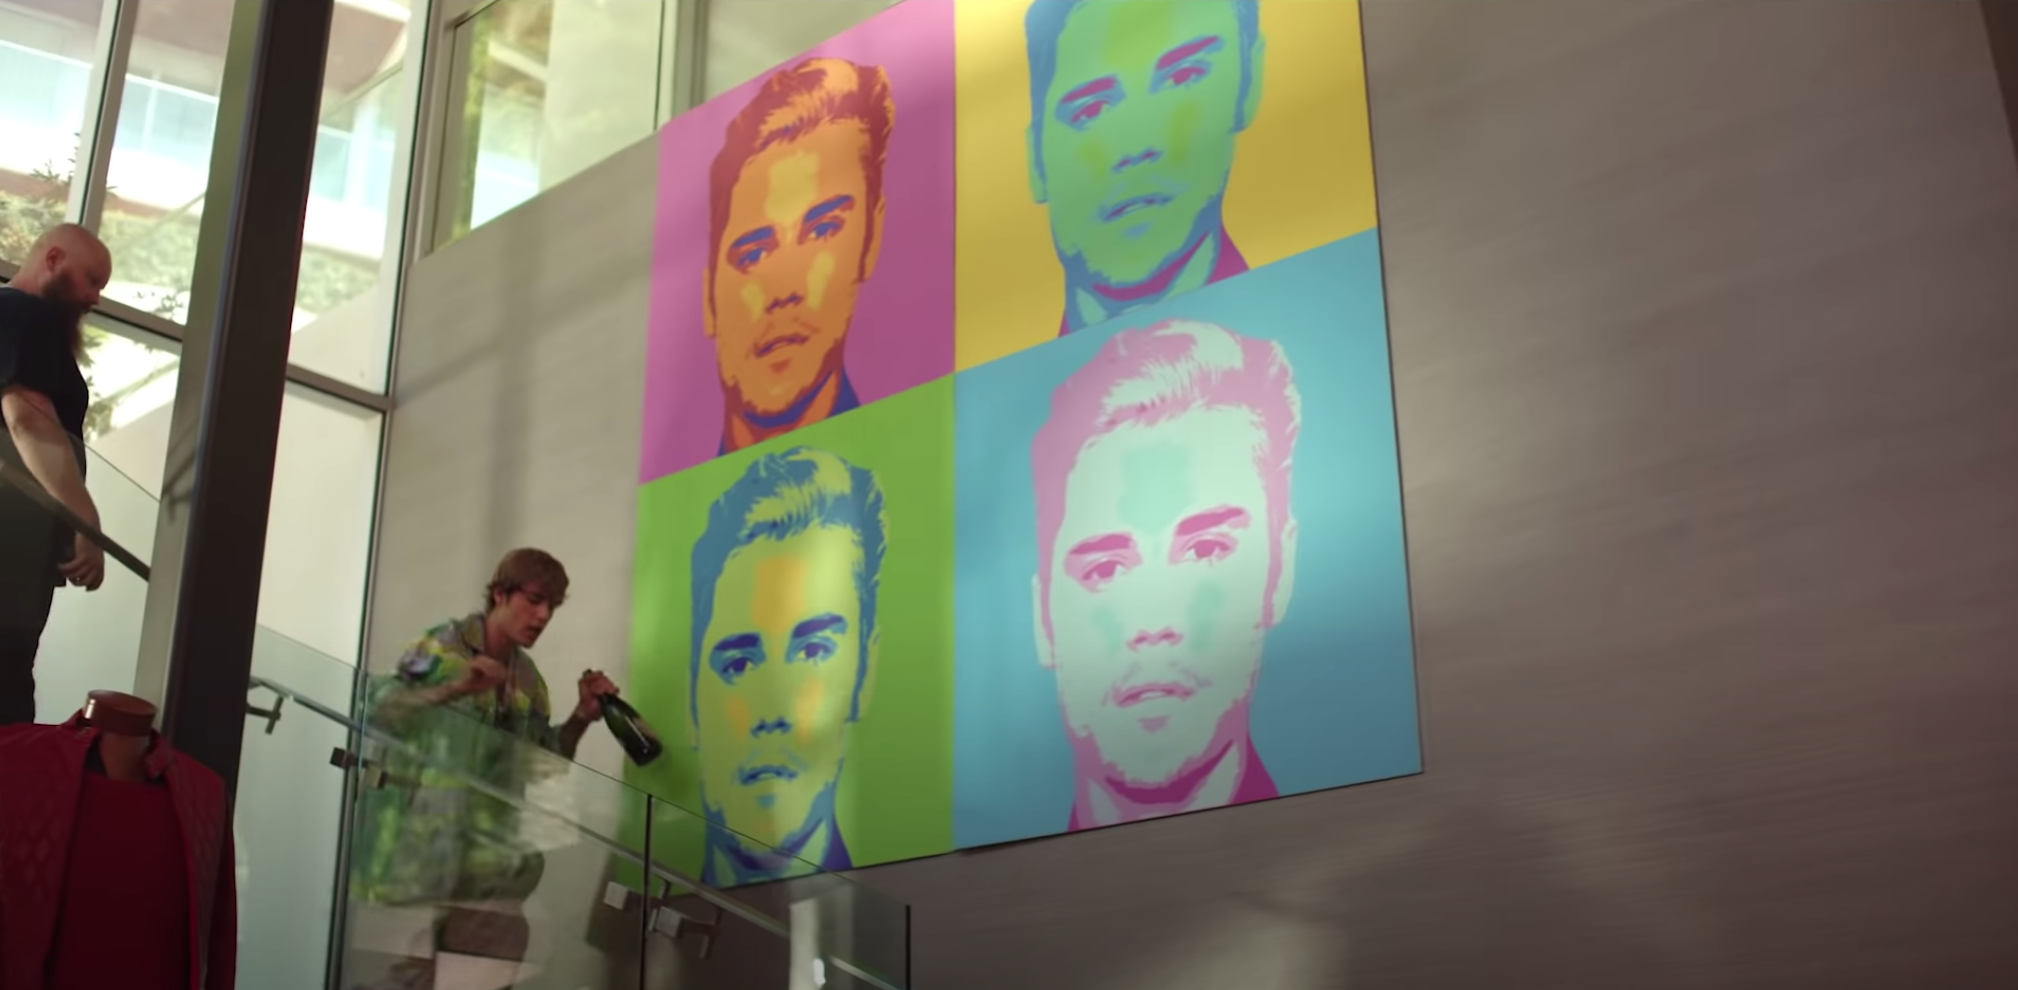 Justin walks by a colorful Andy Warhol-style pop art portraits of himself